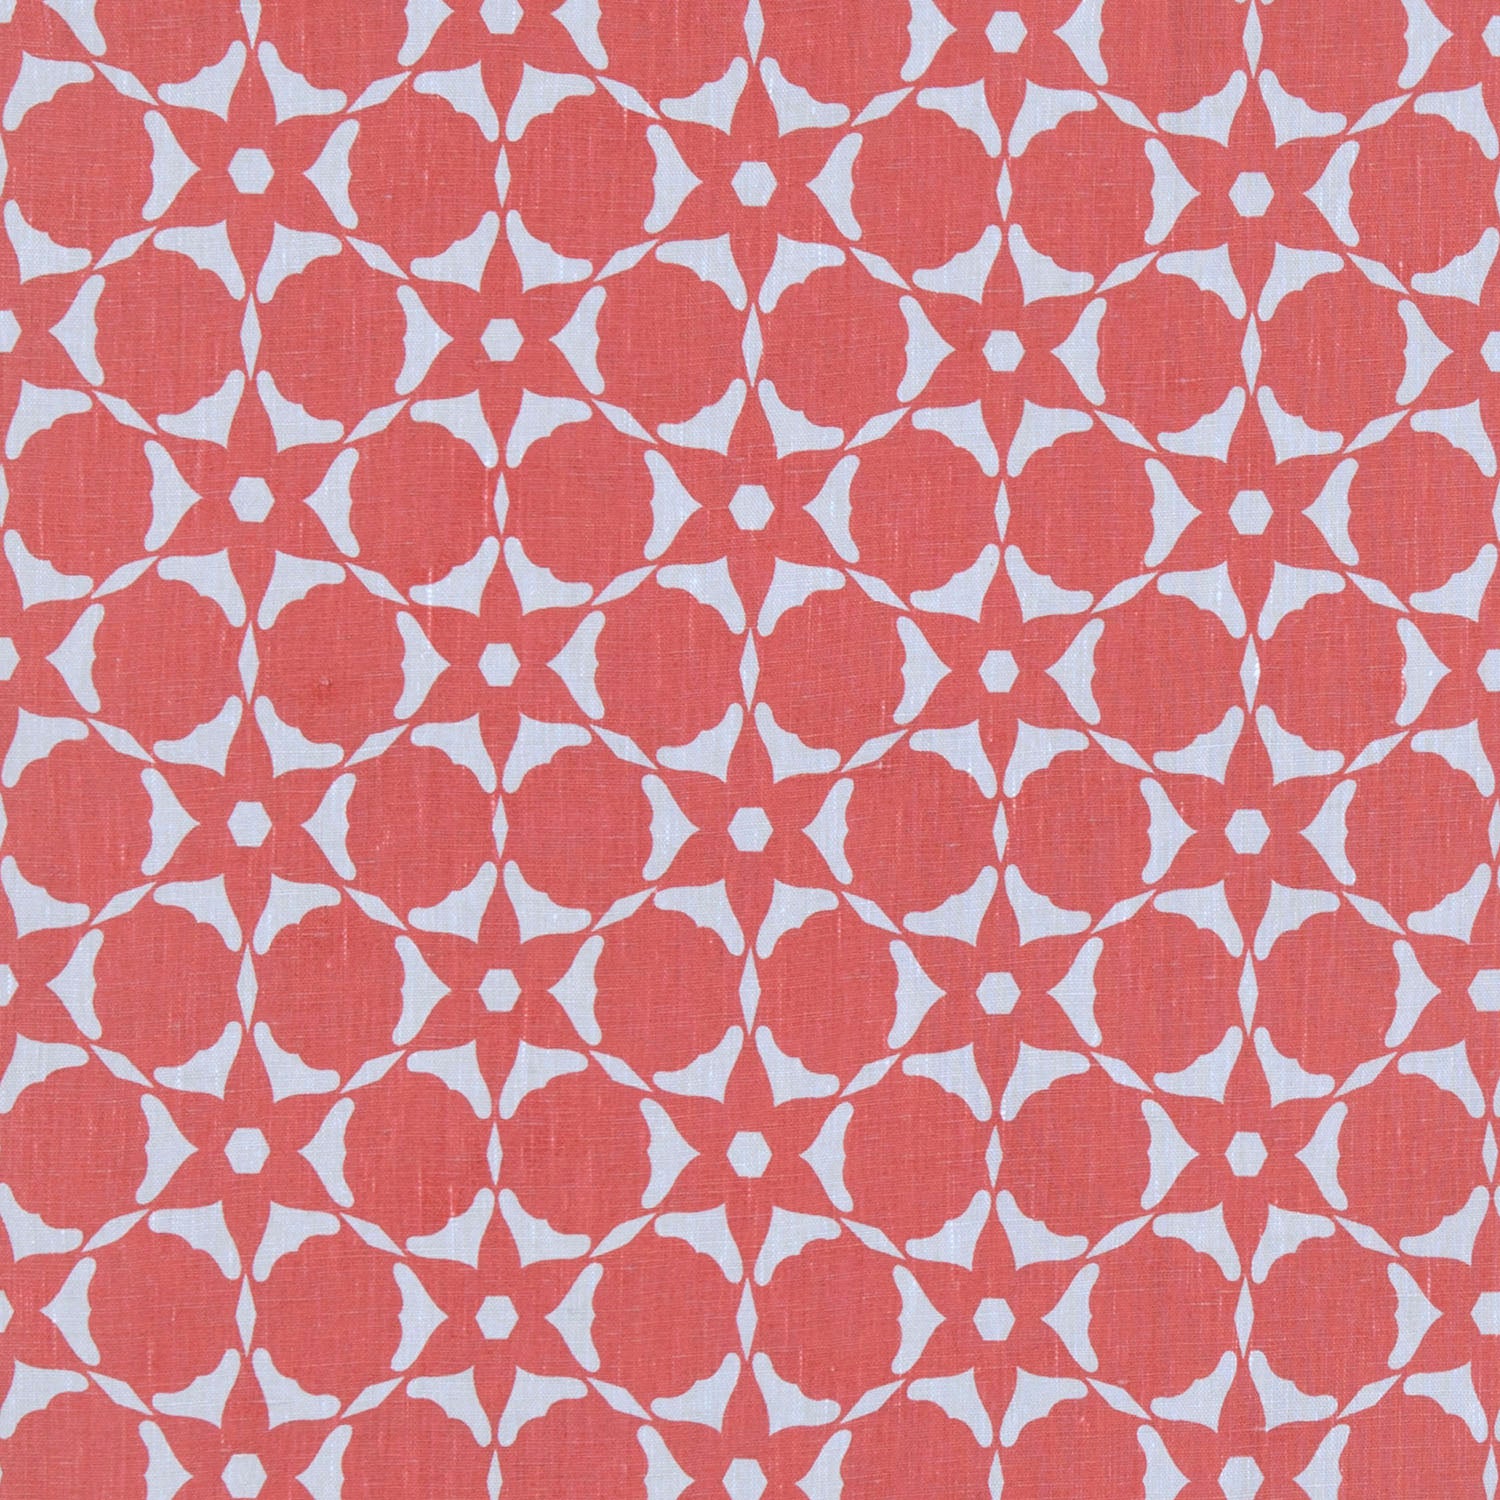 Fabric in a floral lattice print in light blue on a coral field.